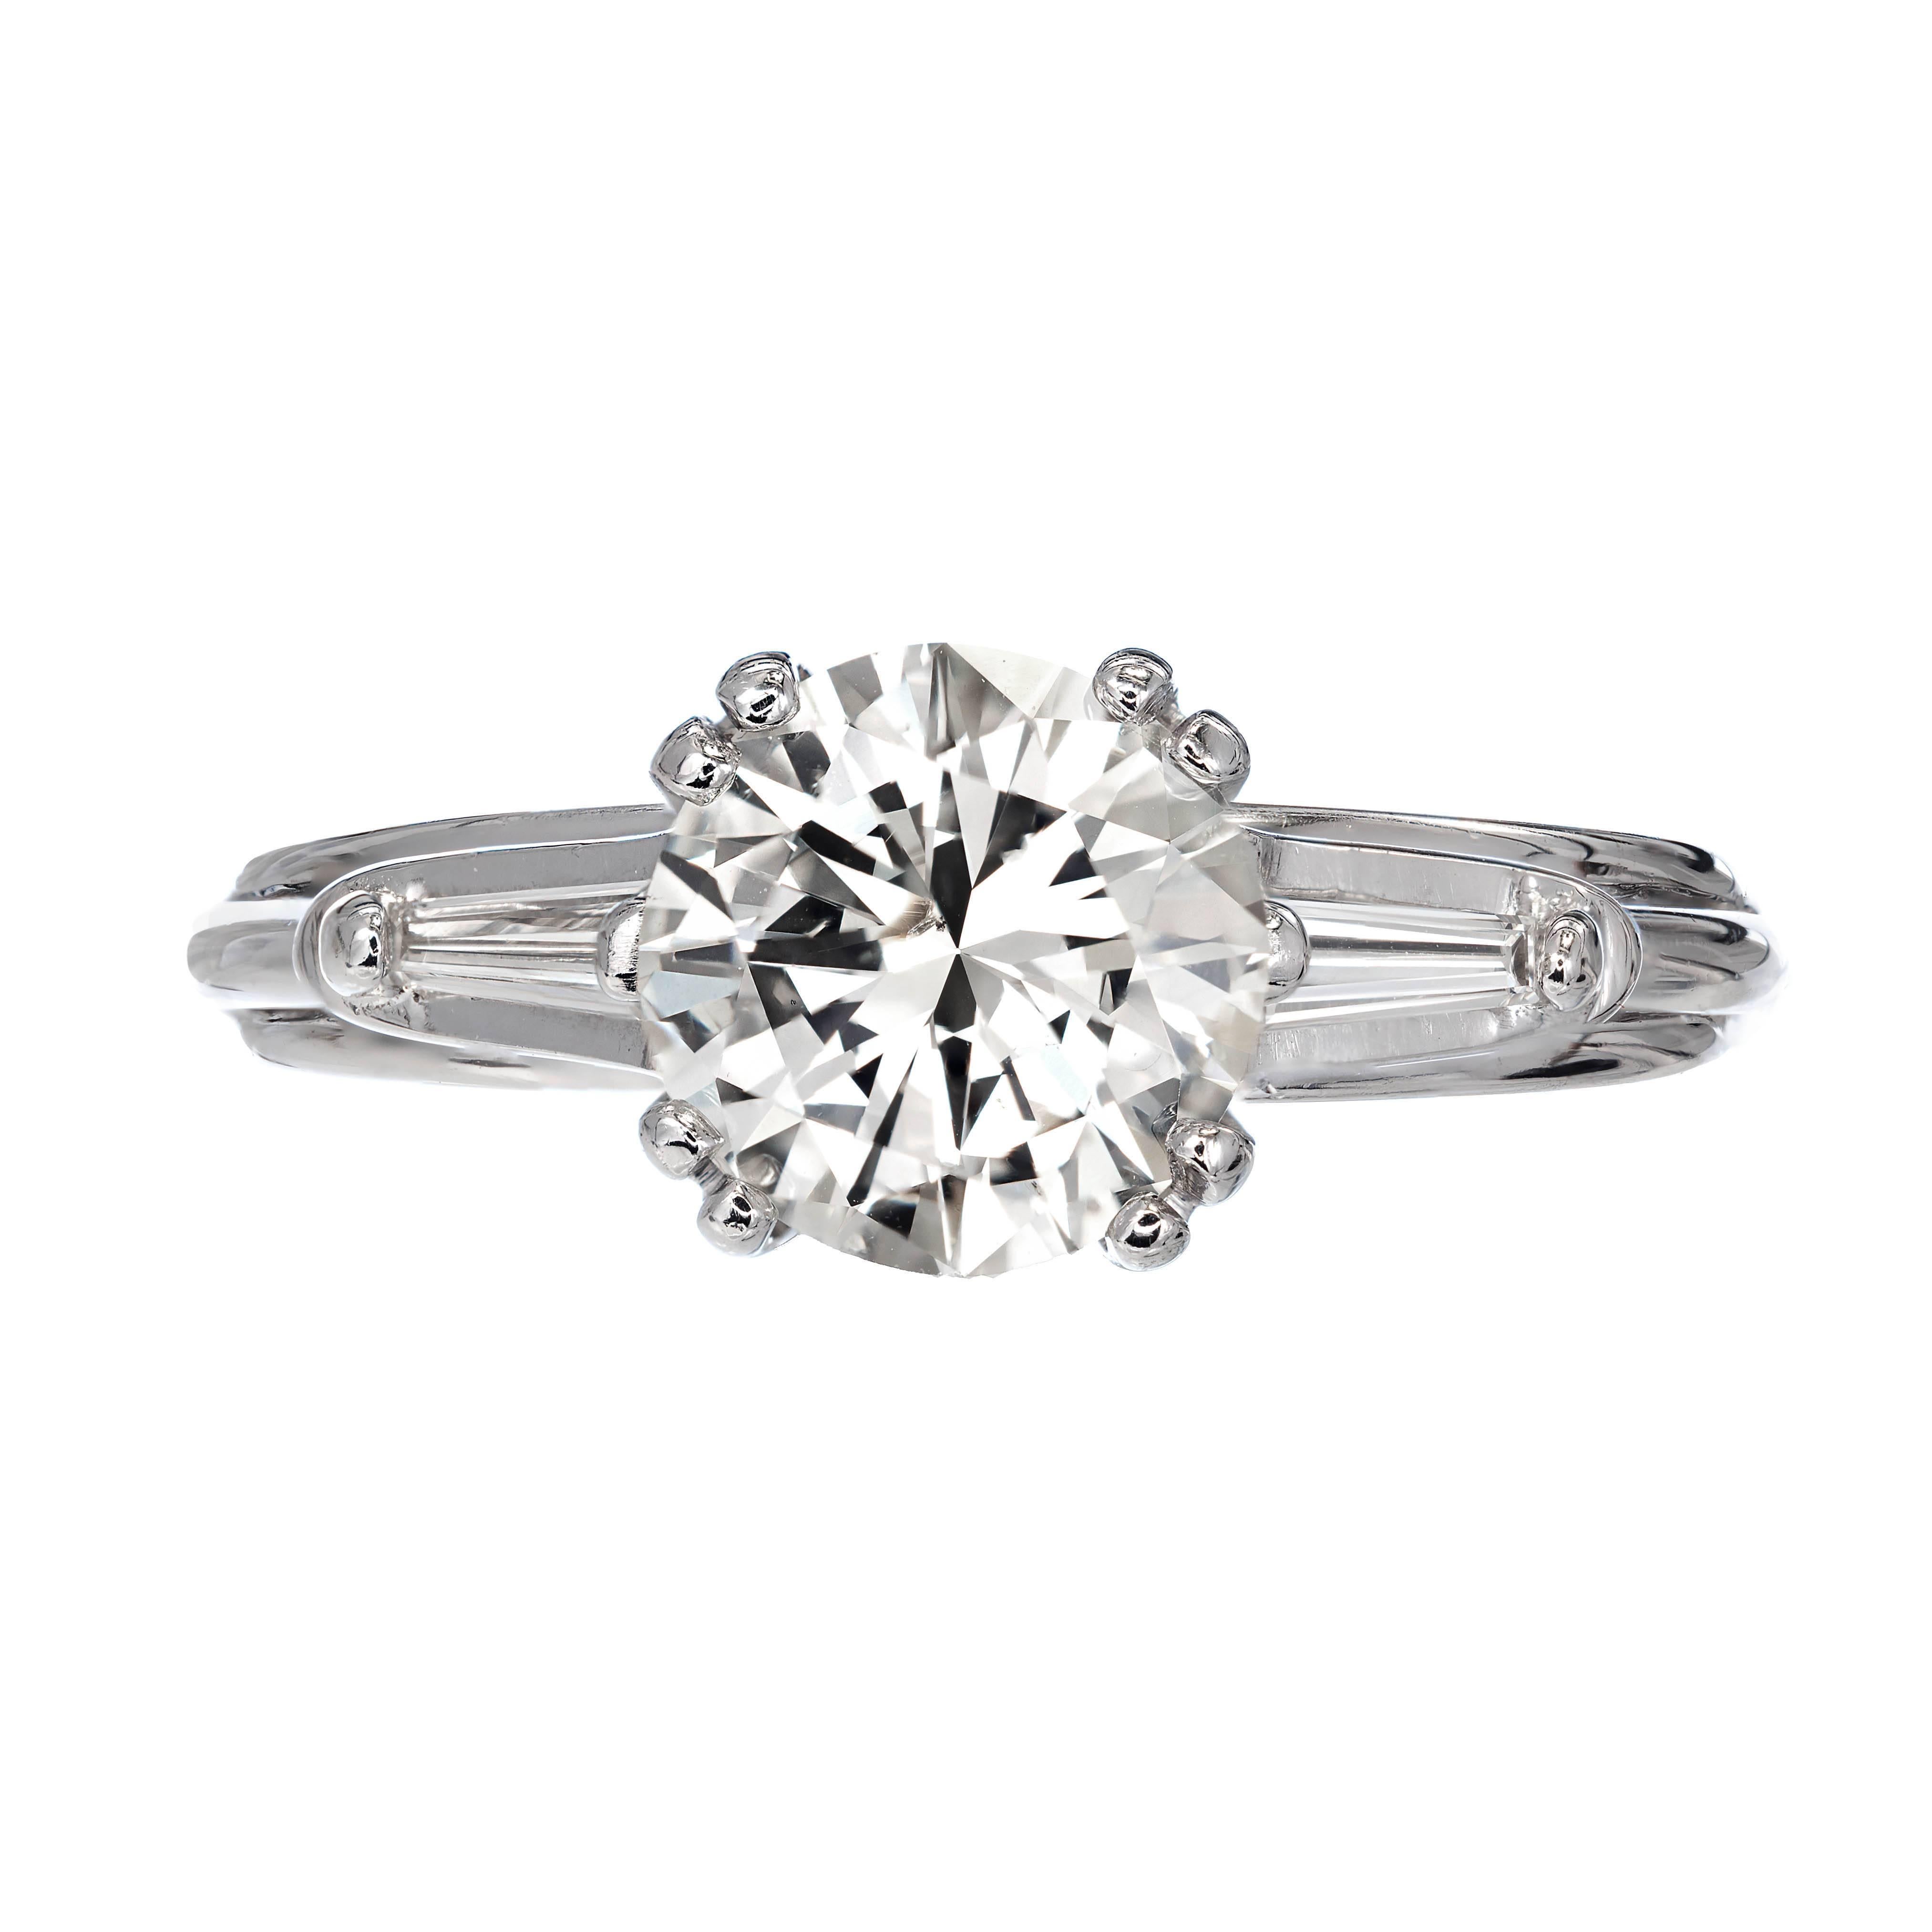 Three-stone round and baguette diamond engagement ring. This GIA certified round brilliant cut diamond faces up white and very bright. It is set in a handmade wire double prong 14k white gold setting. 

1.54ct Diamond M color, SI2 clarity, round